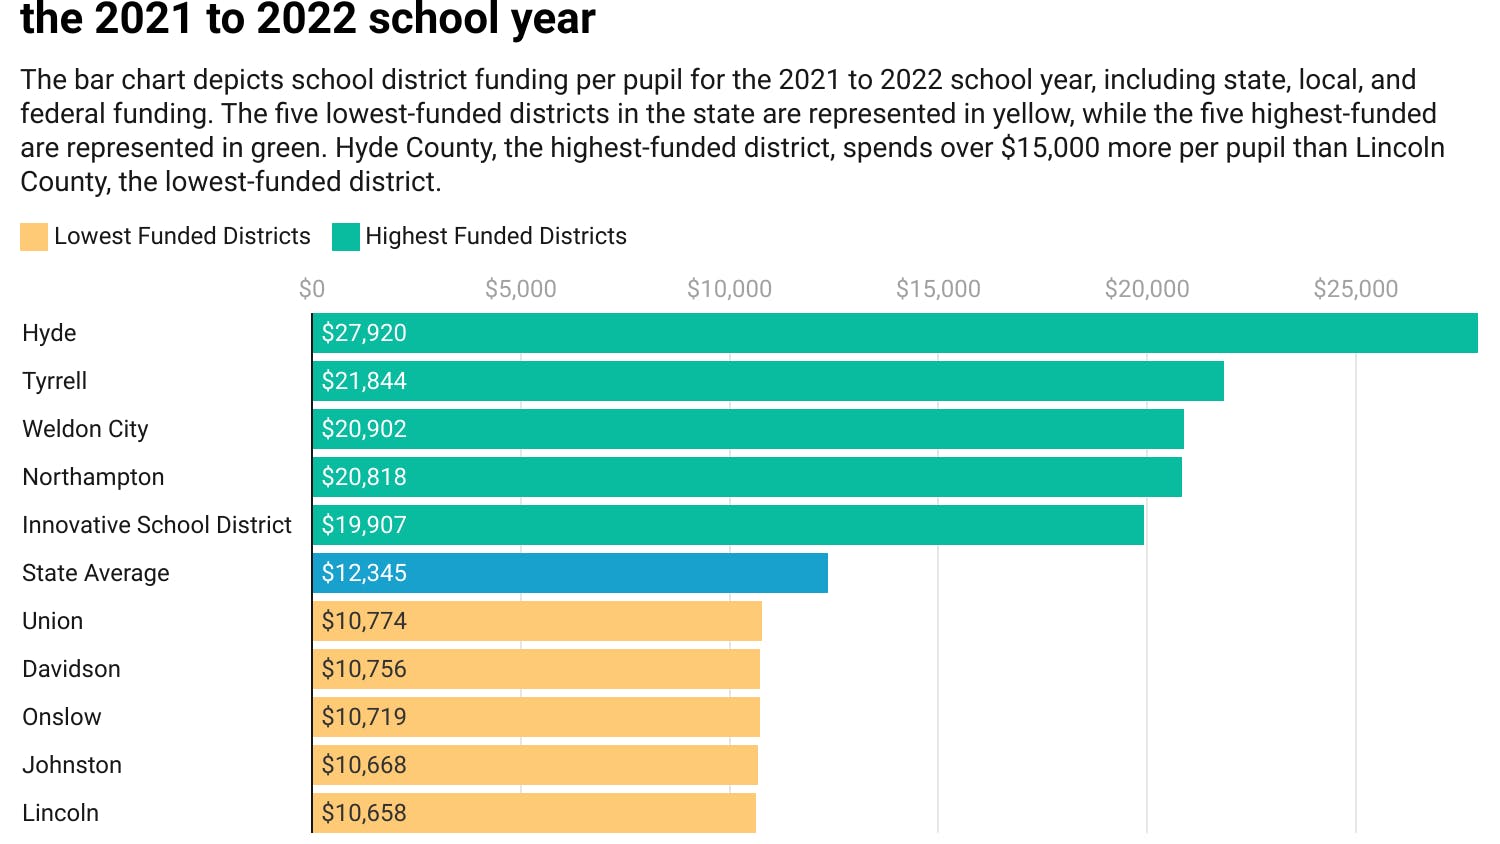 Hyde County had more than twice the state average in school funding for the 2021 to 2022 school year